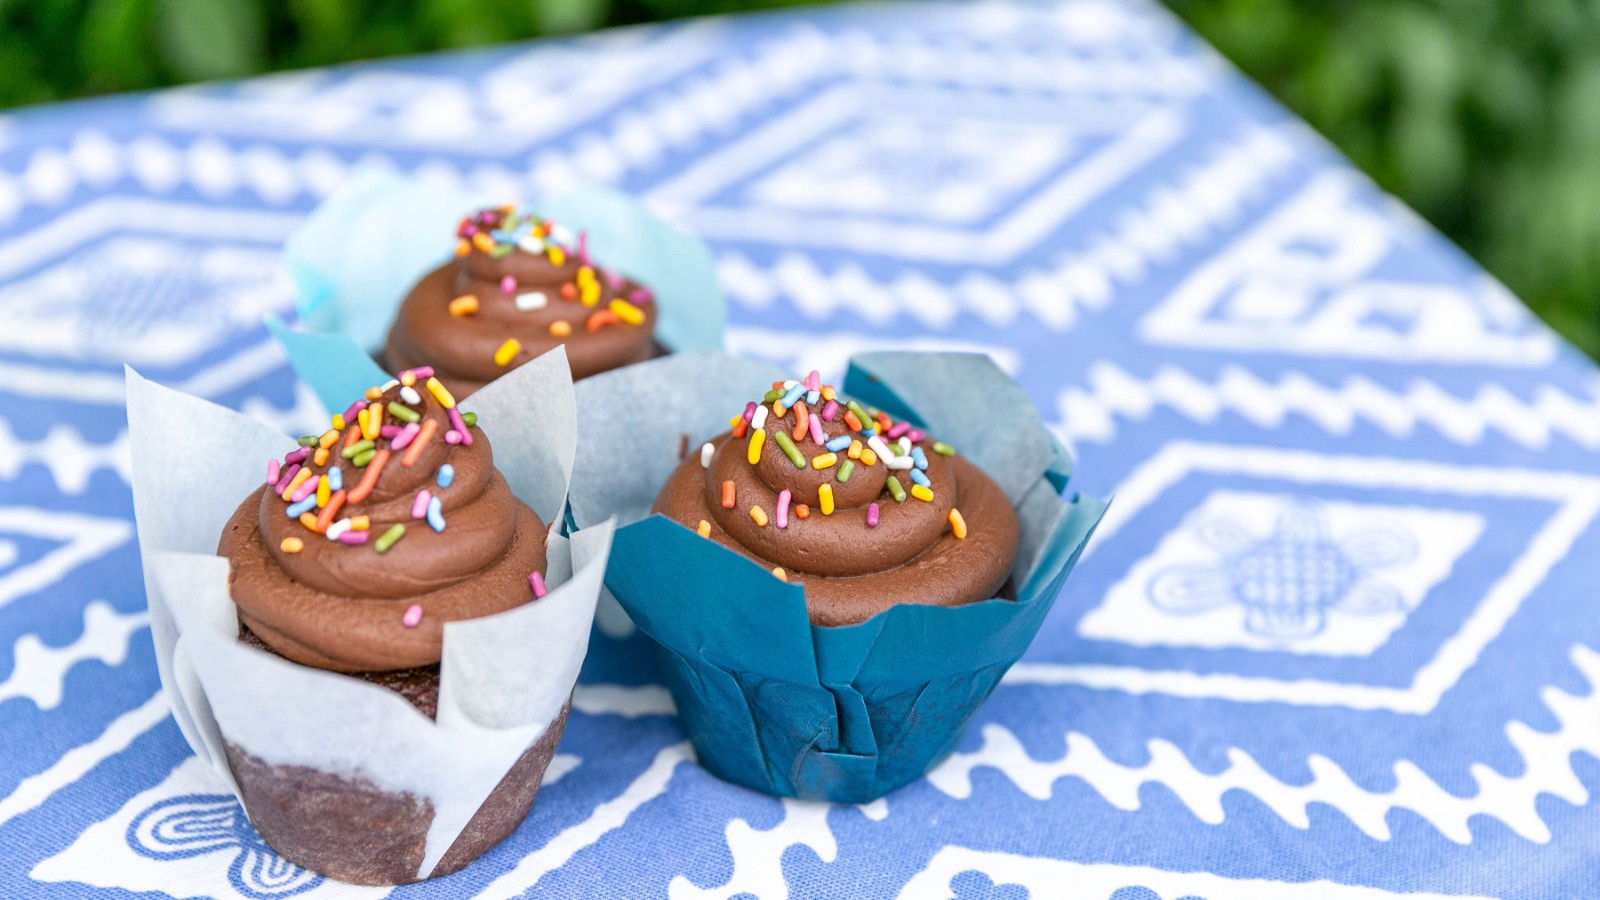 Image of Chocolate Cupcakes with Icing